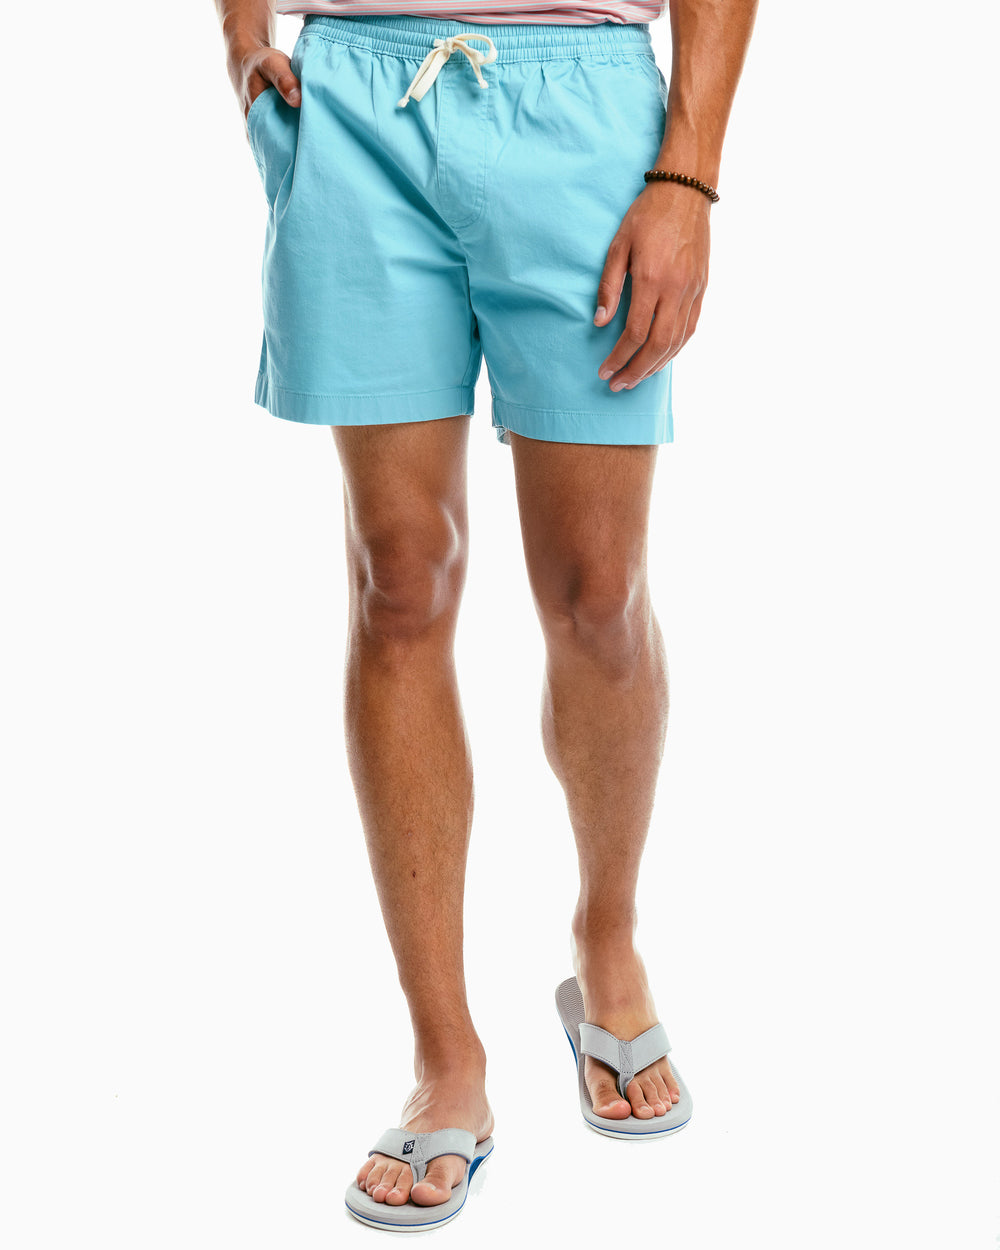 The model front view of the Sun Farer 6 inch short - Ocean Teal